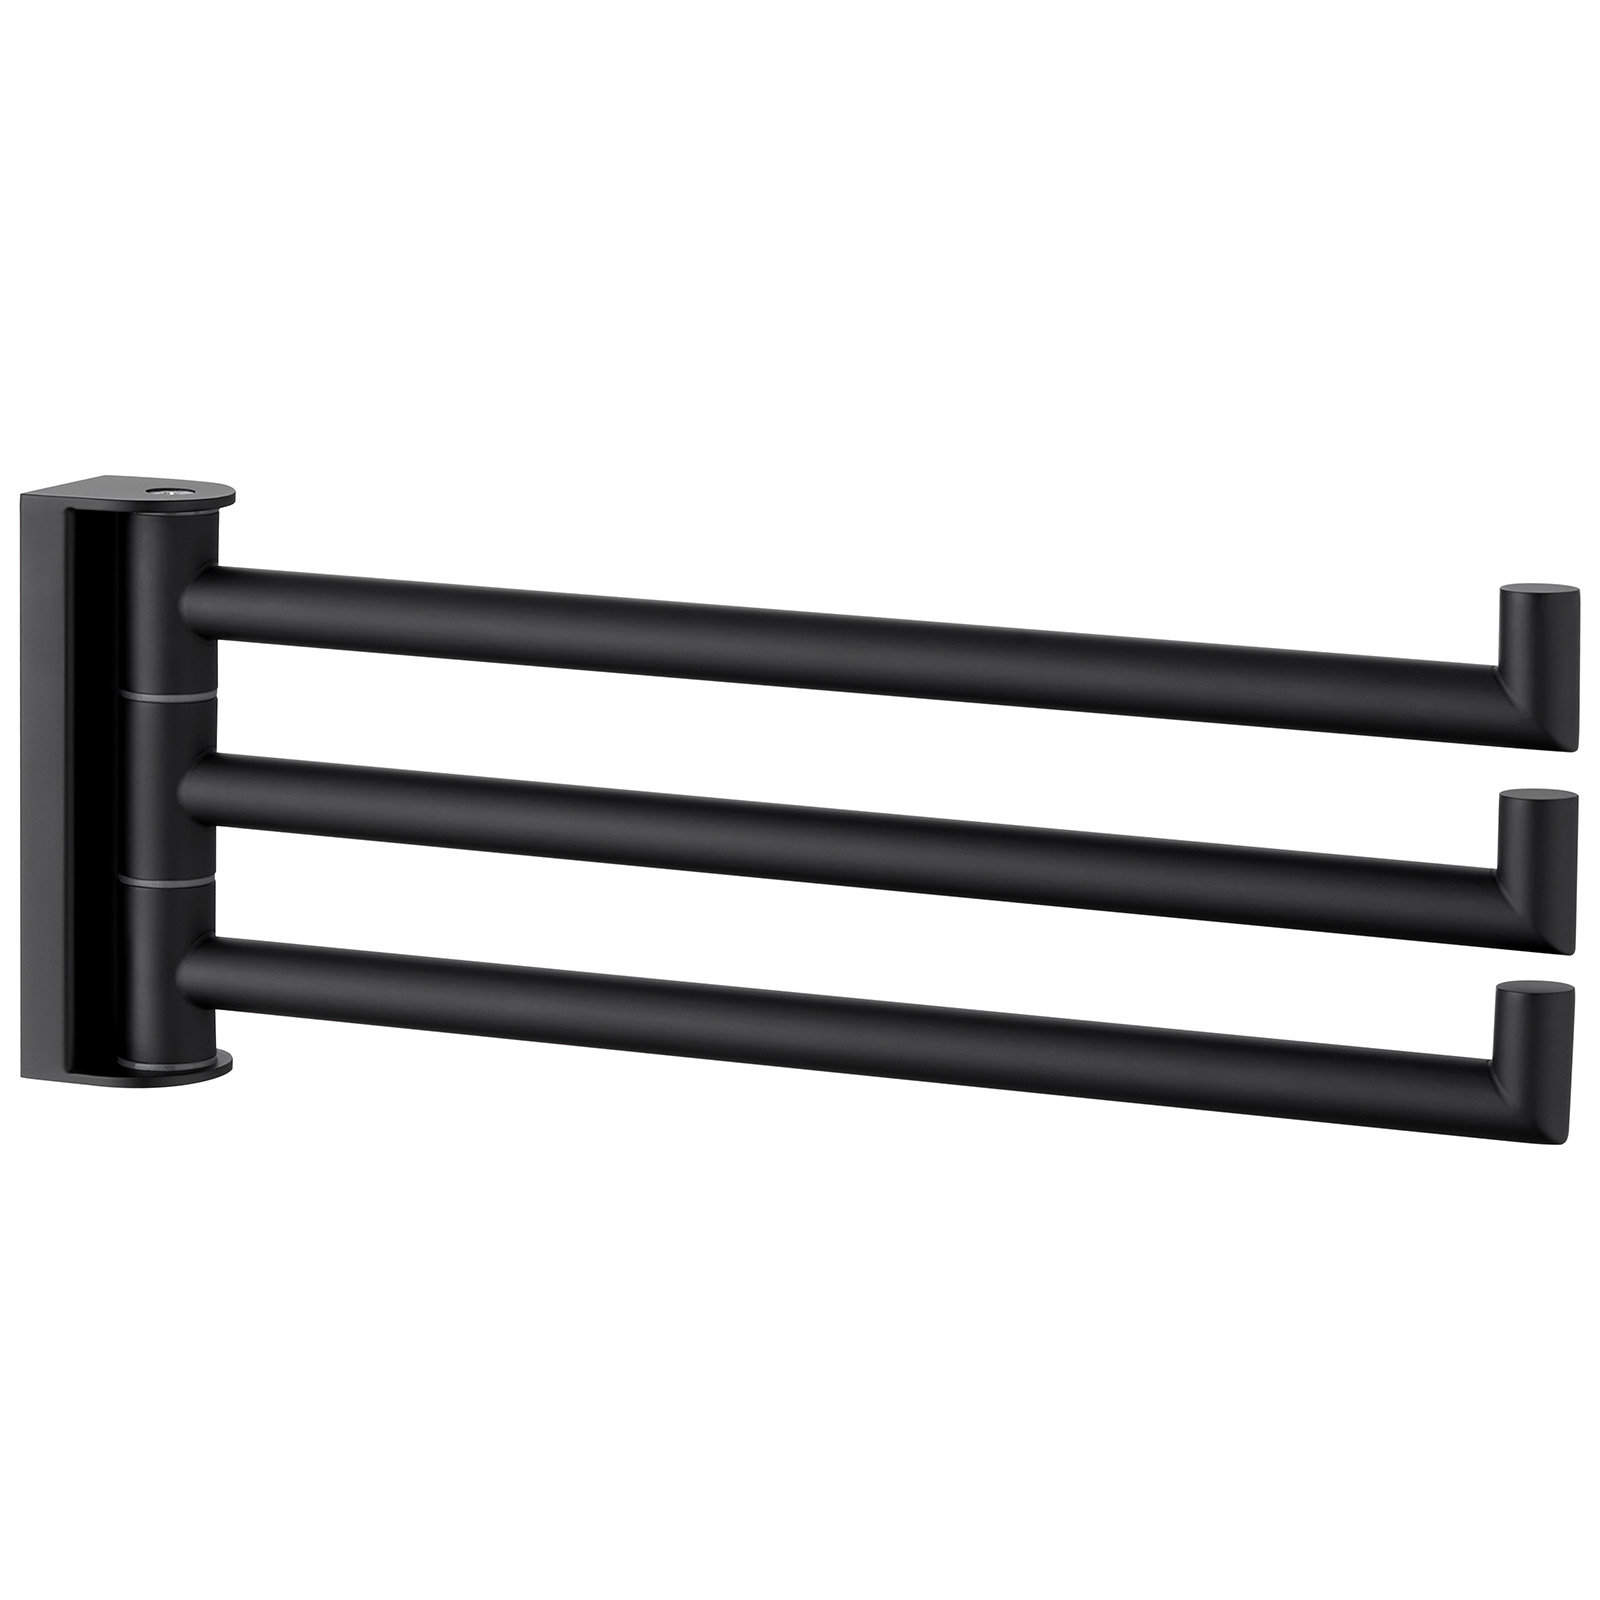 AngleSimple HD103 Wall Mounted 3 Swivel Arms Hand Towel Bar Finish: Matte Black